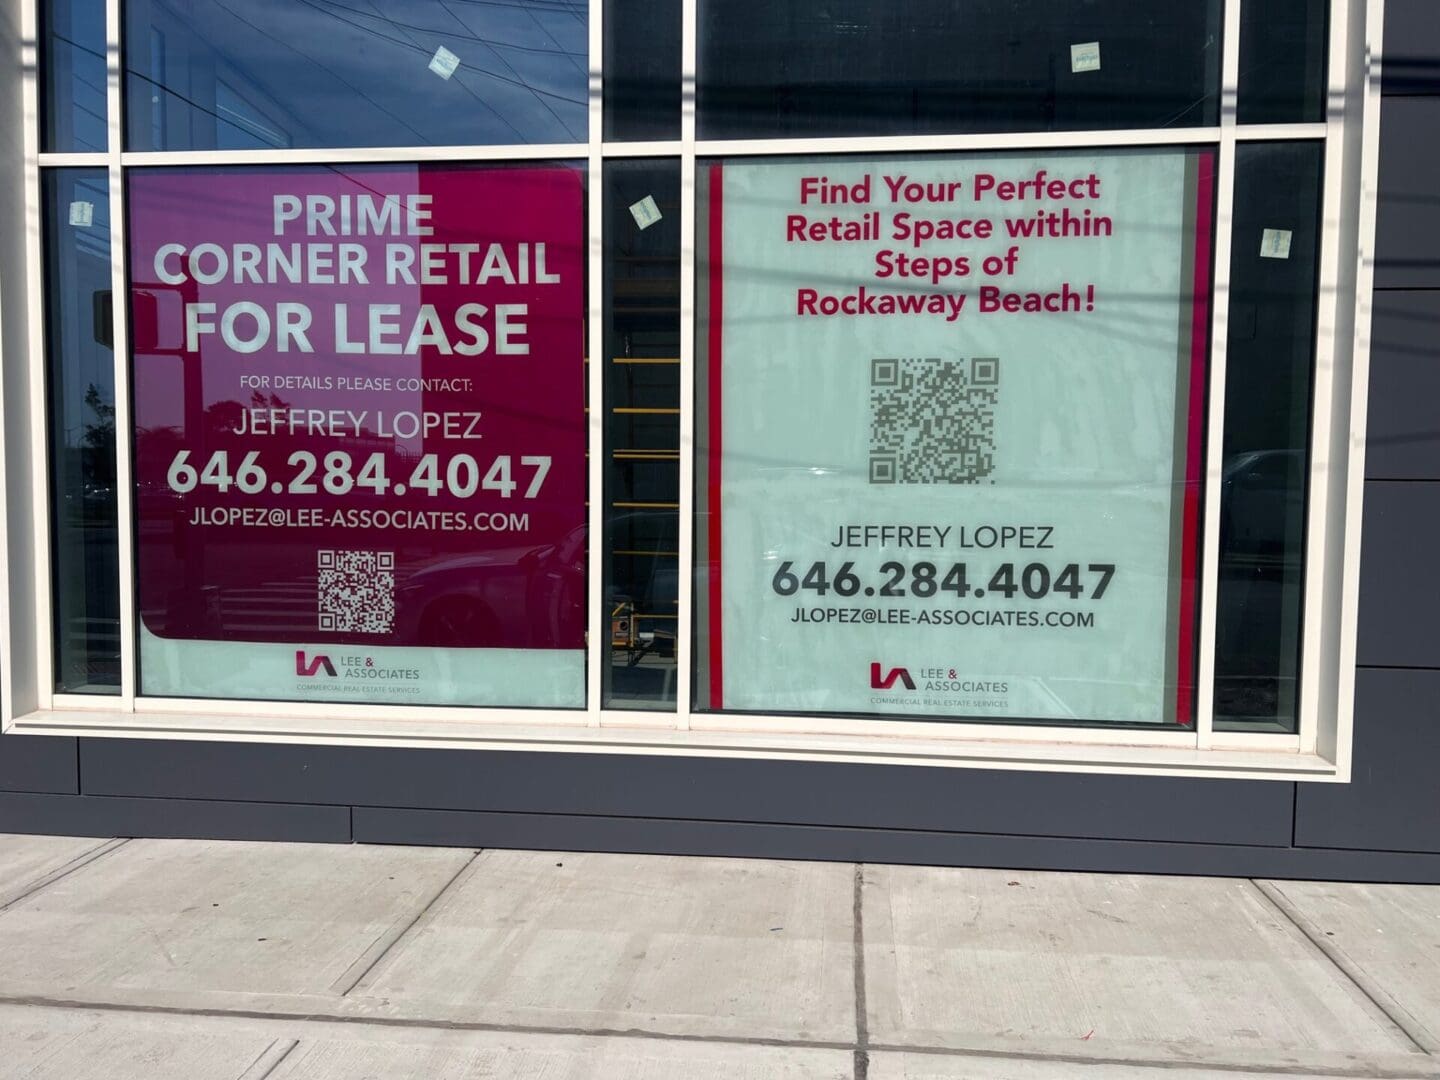 A building with two windows and a qr code on the window.